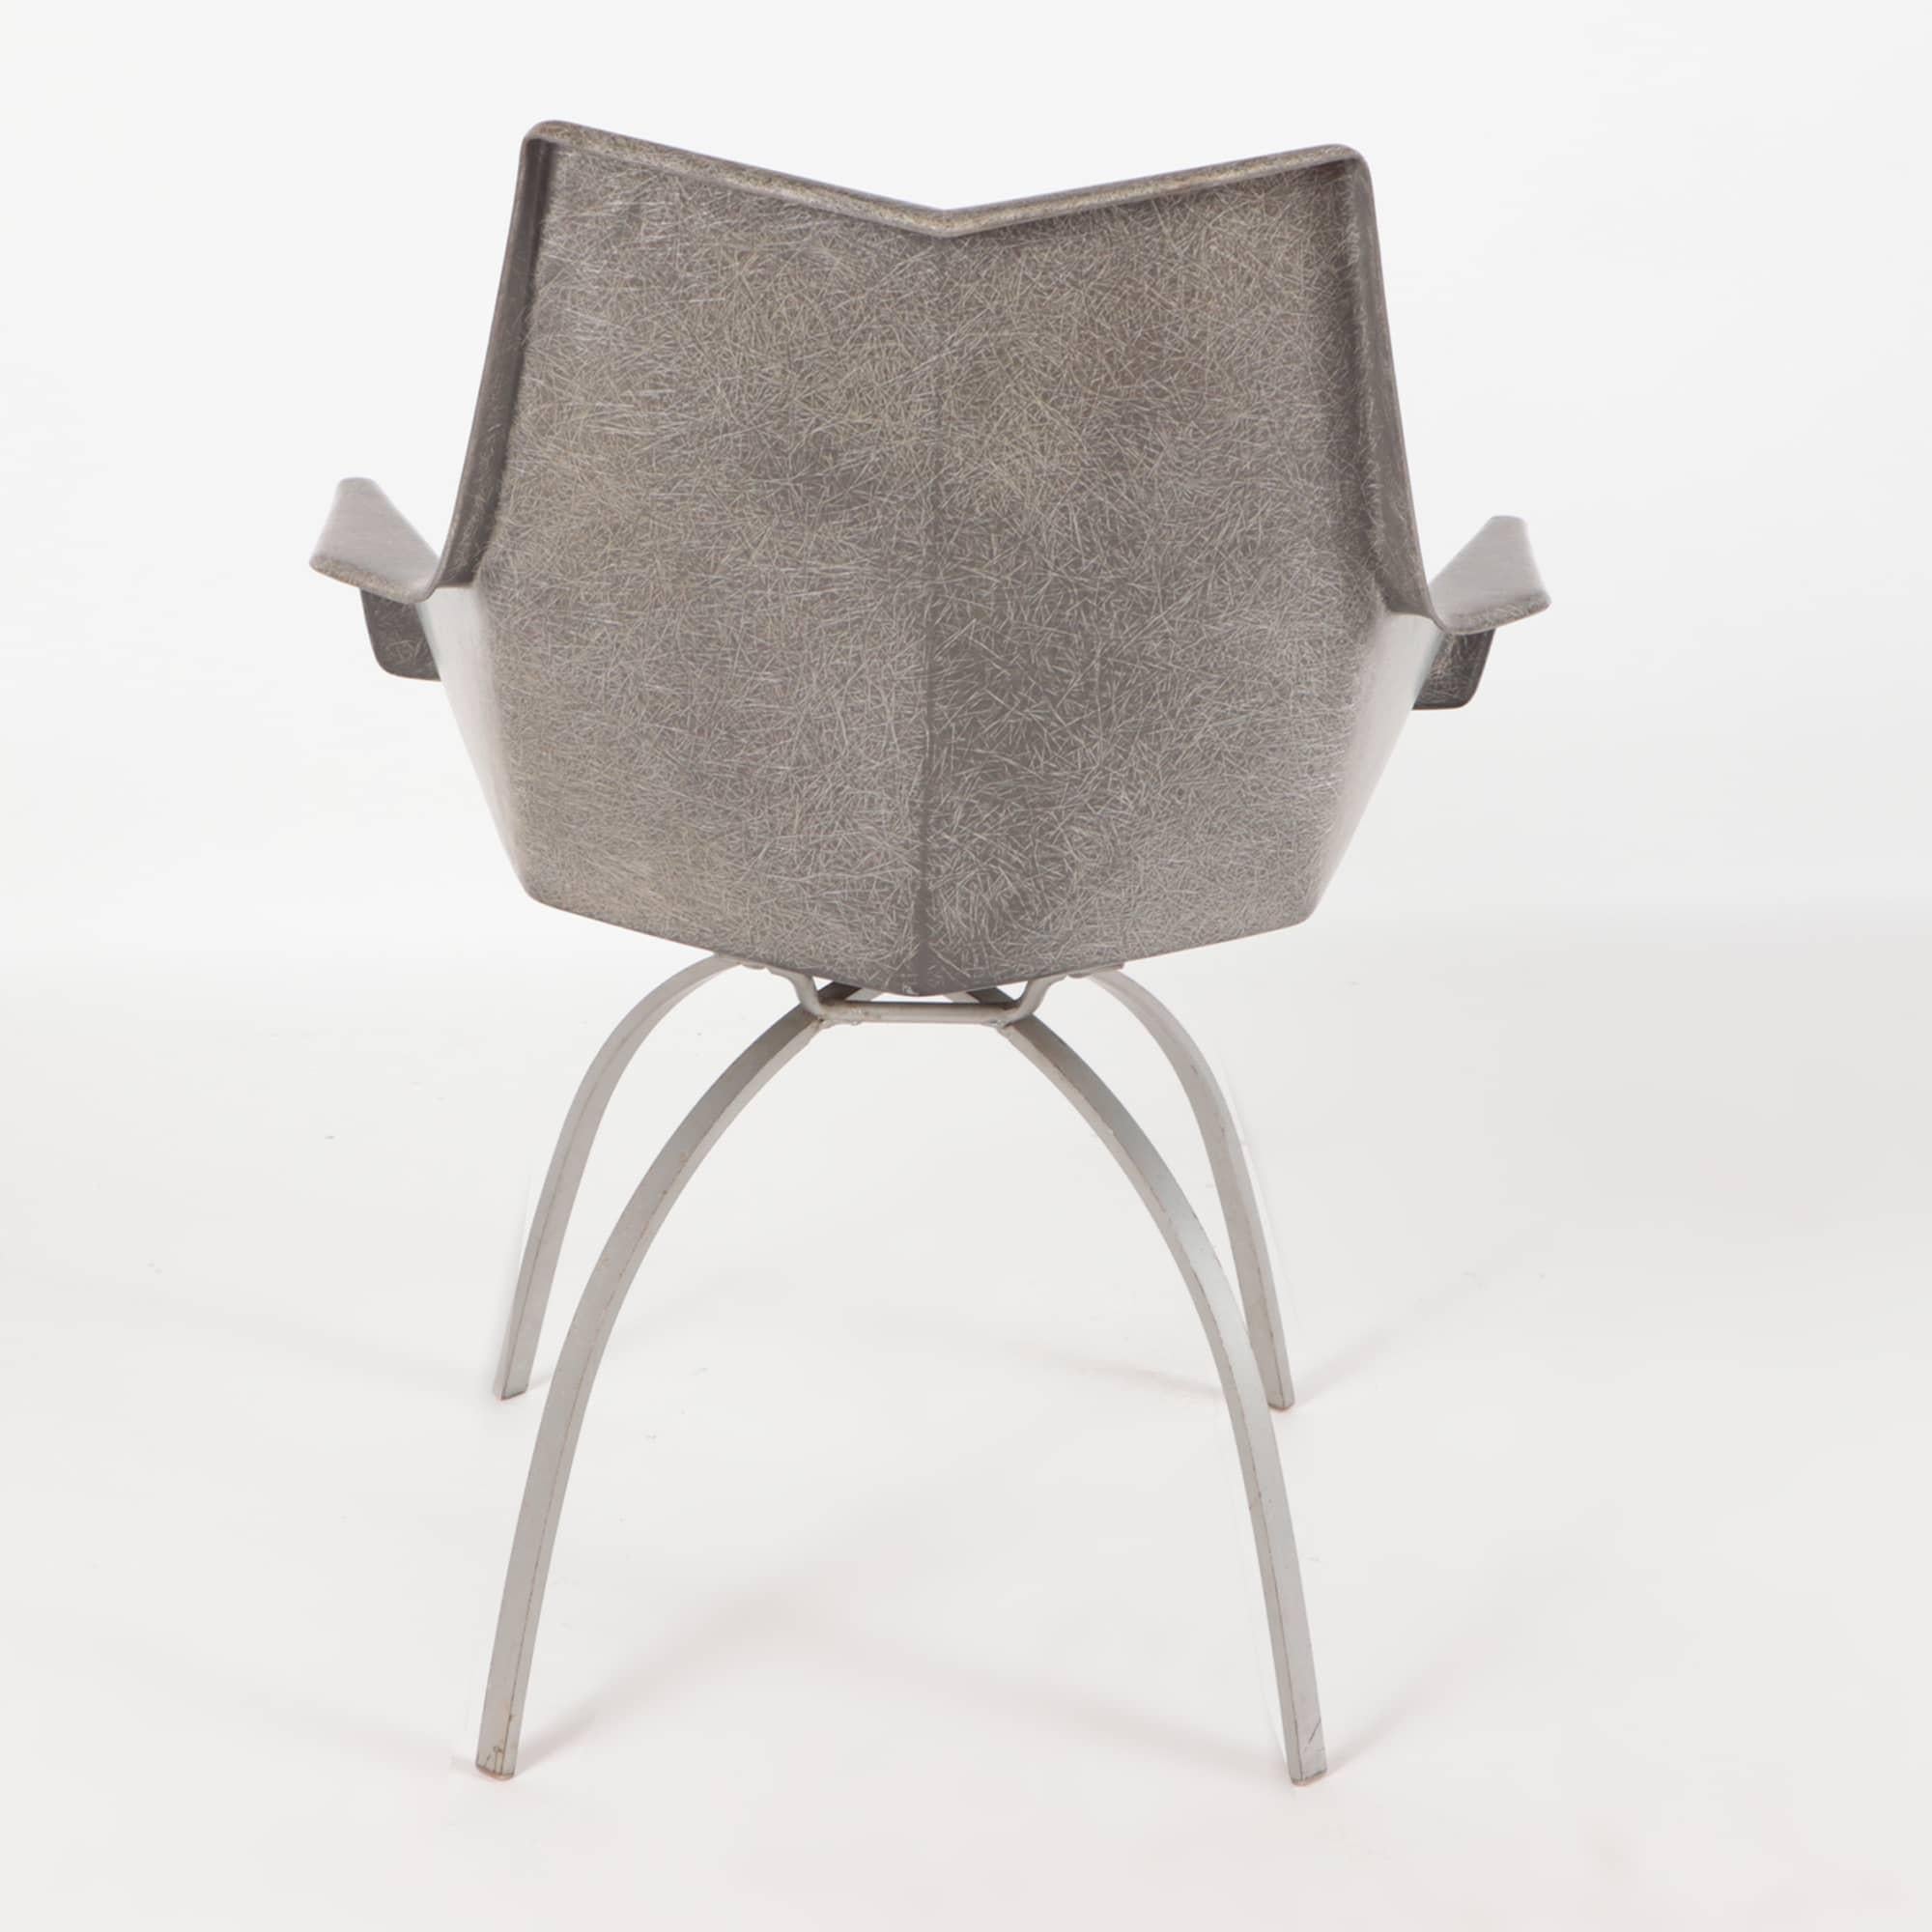 Metal A Paul McCobb Faceted Origami Chair on Spider Base, circa 1960 For Sale